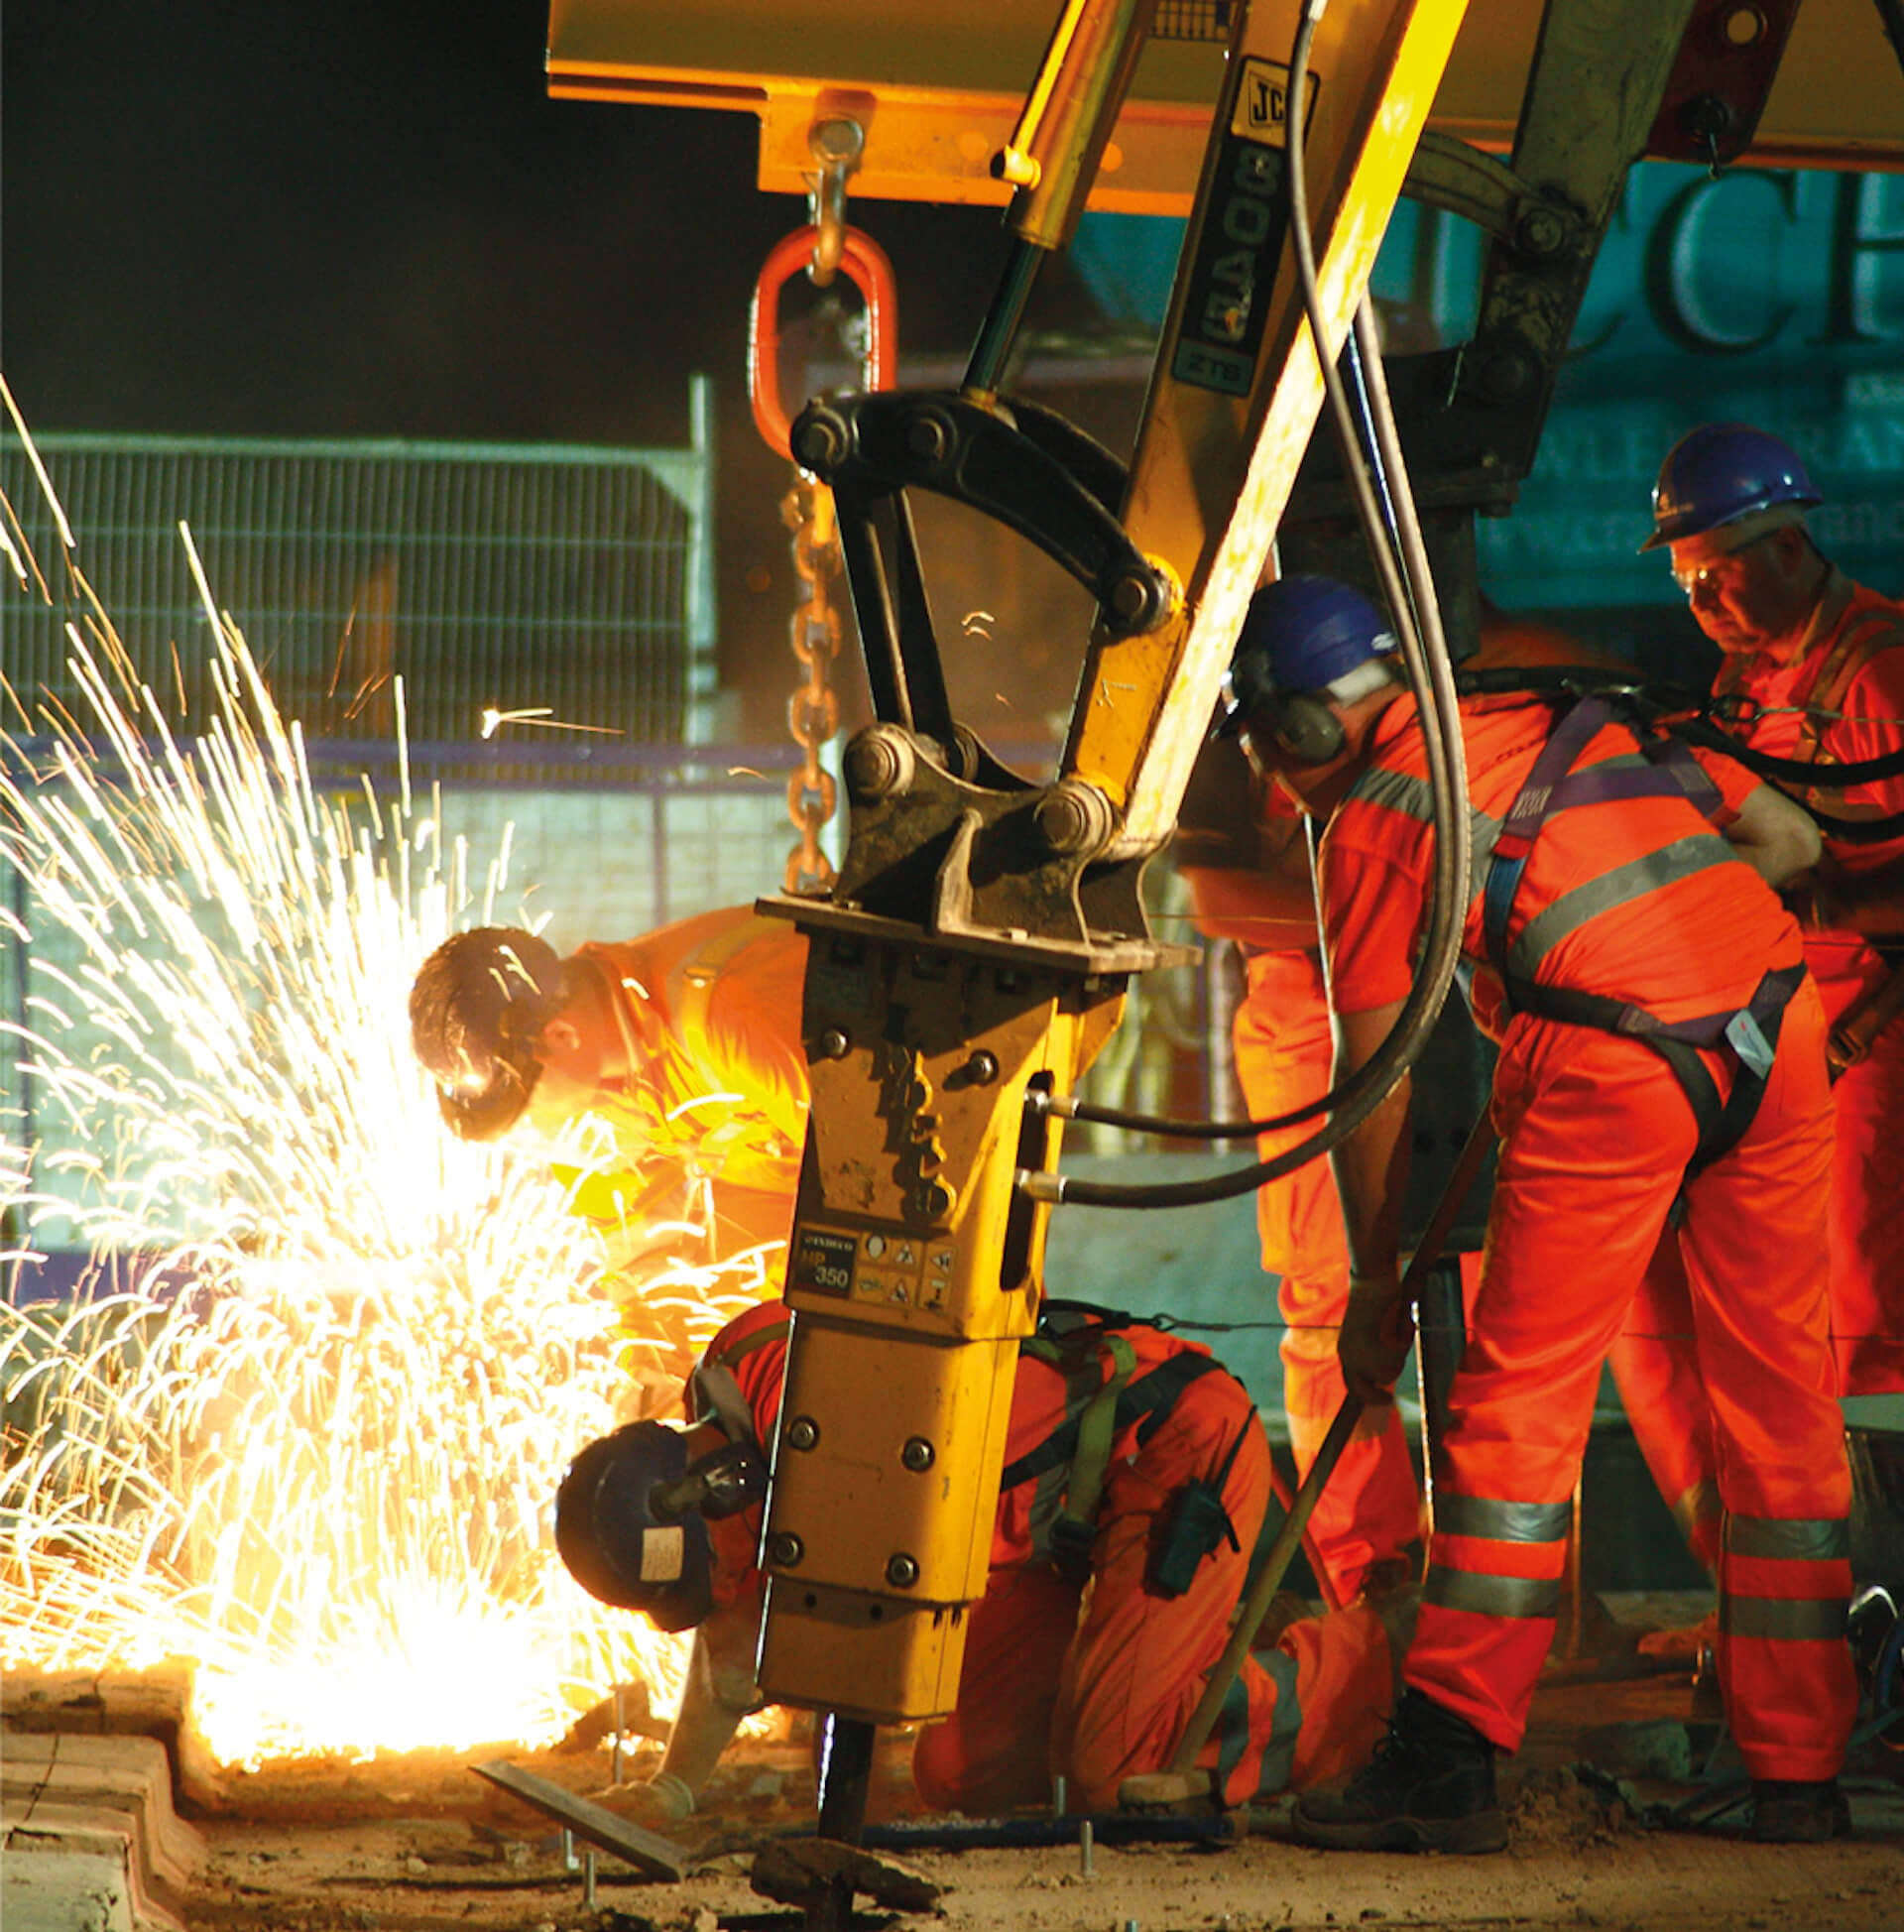 A night scene onsite of concrete being cut by a machine in the foreground. Several workers in the background carrying out hot cutting with sparks flying. Workers wearing protective wear.